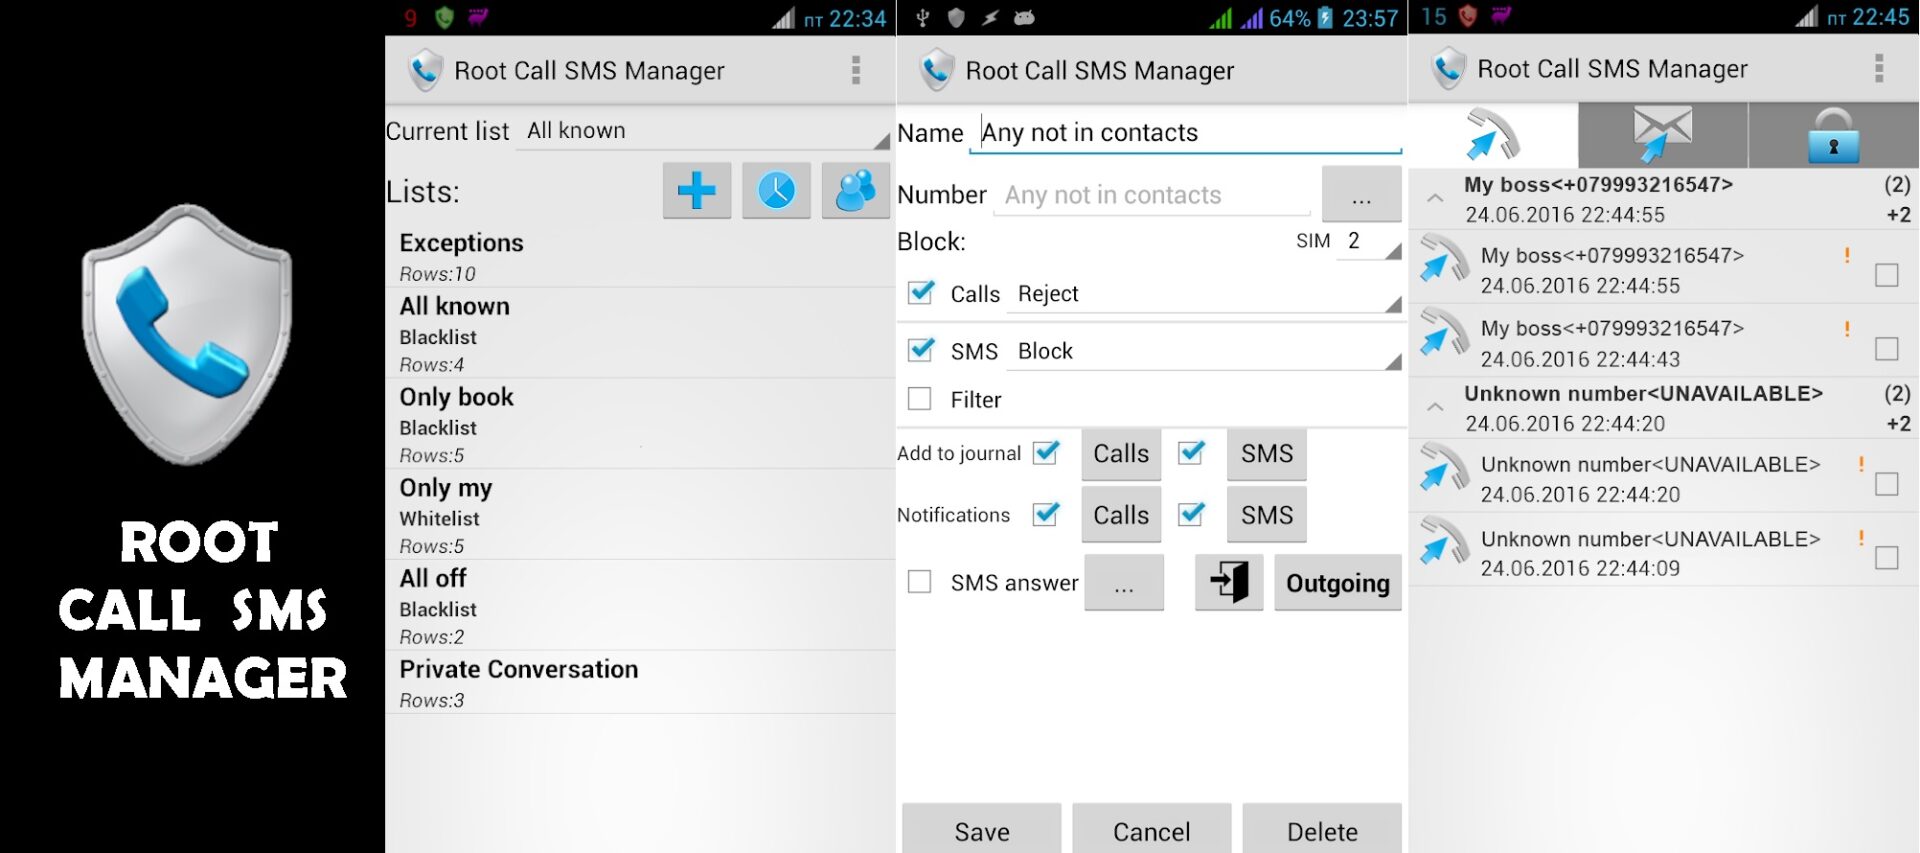 Text Blocker Apps for Android Calls Root Call SMS Manager